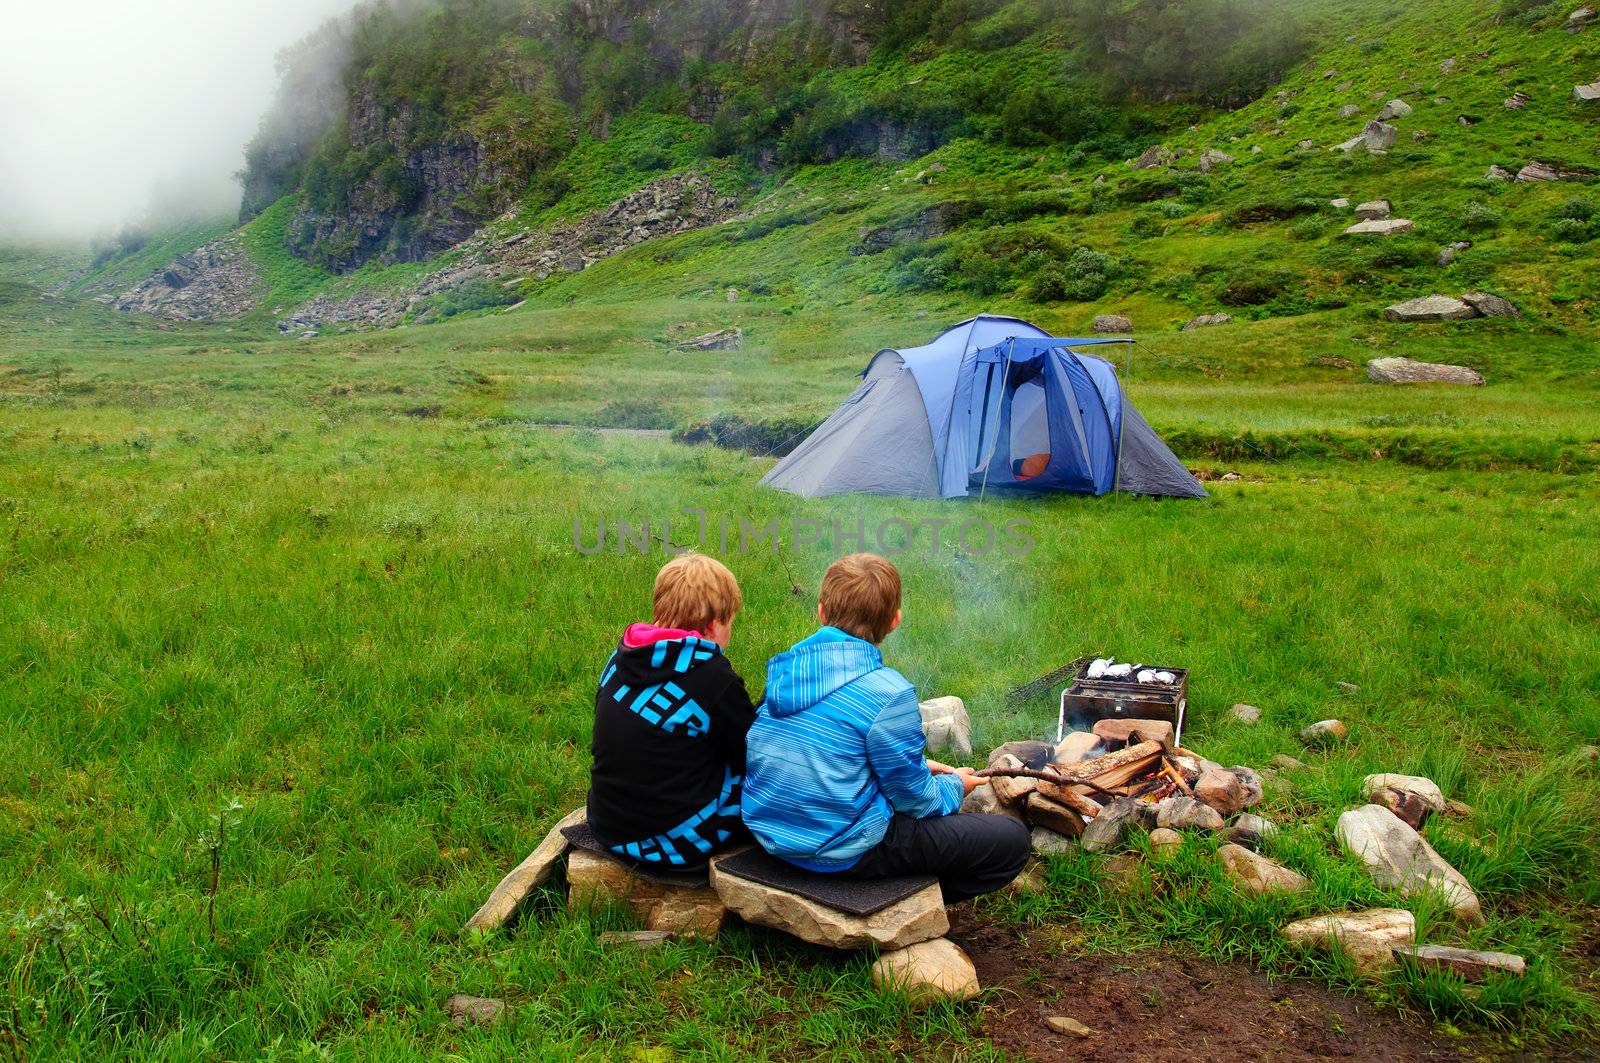 The fog is comming to a mountain camp. Two children at the campfire